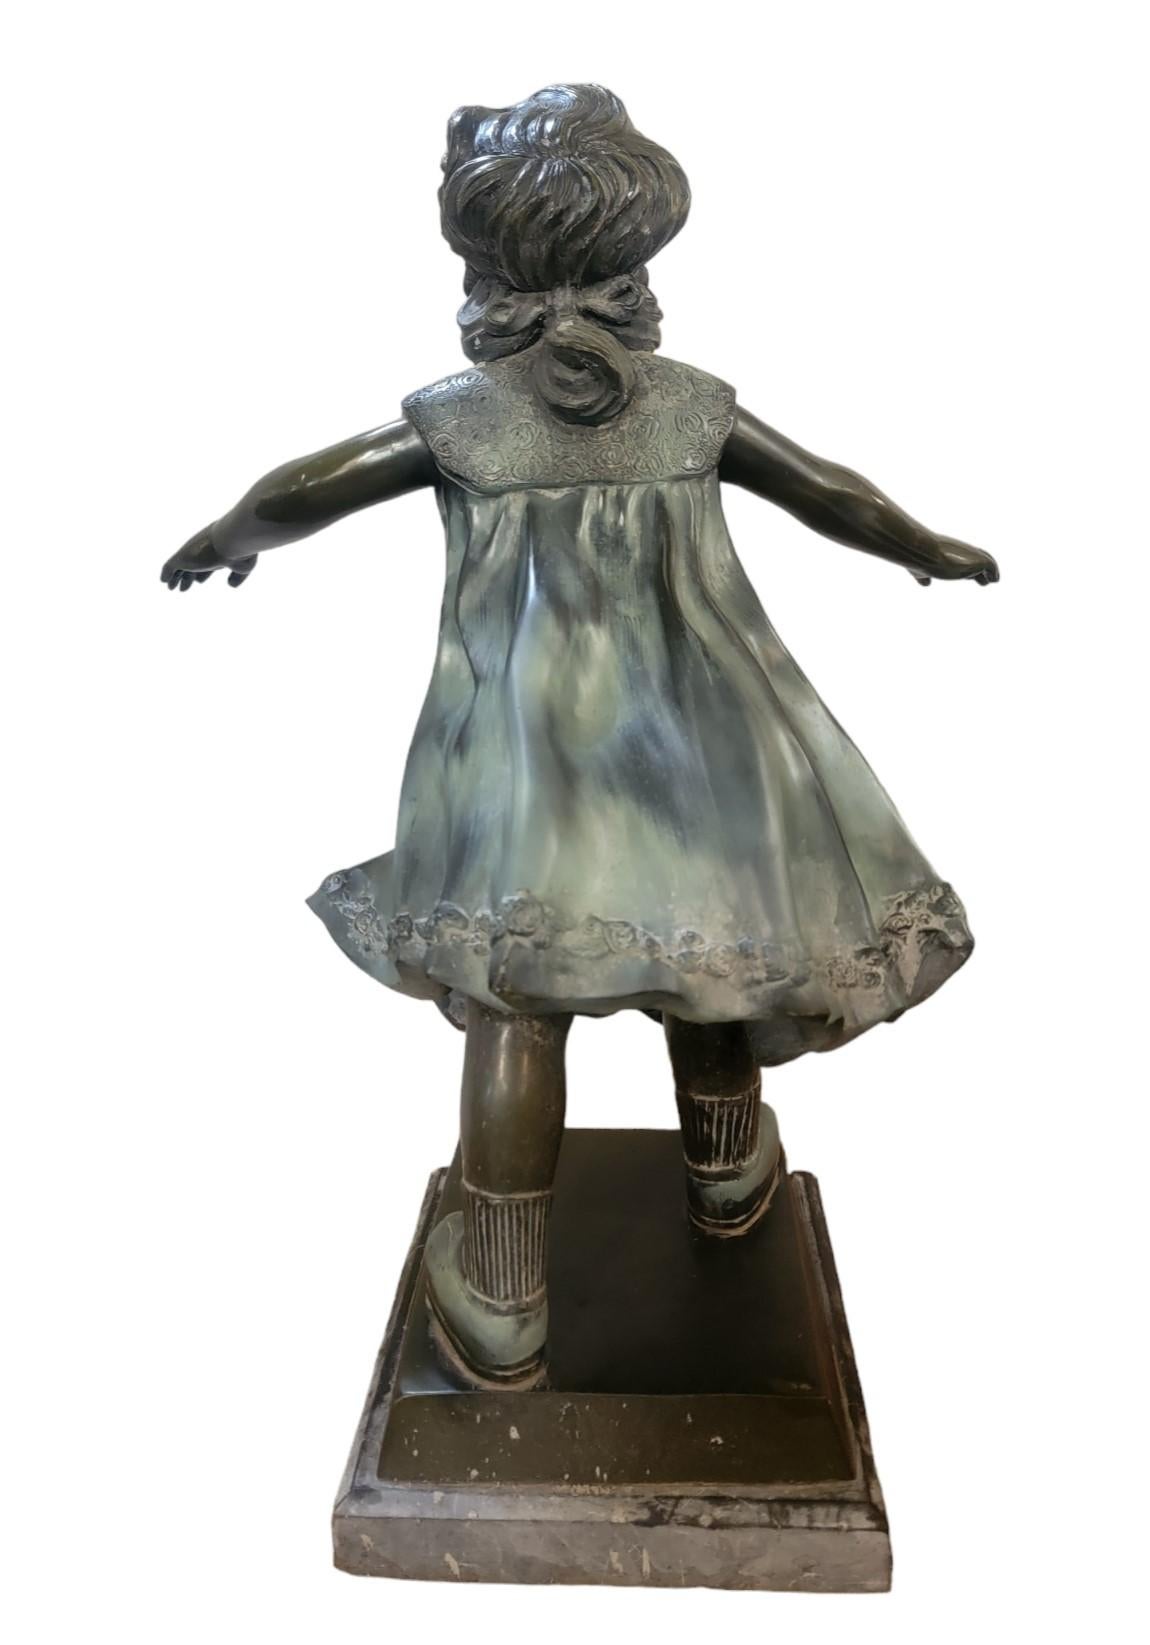 1930s of a youthful girl playing Marco polo. 
Blind folded and provided an energetic youthful pose. A great fun sculpture to bring the youth out of any purchaser.